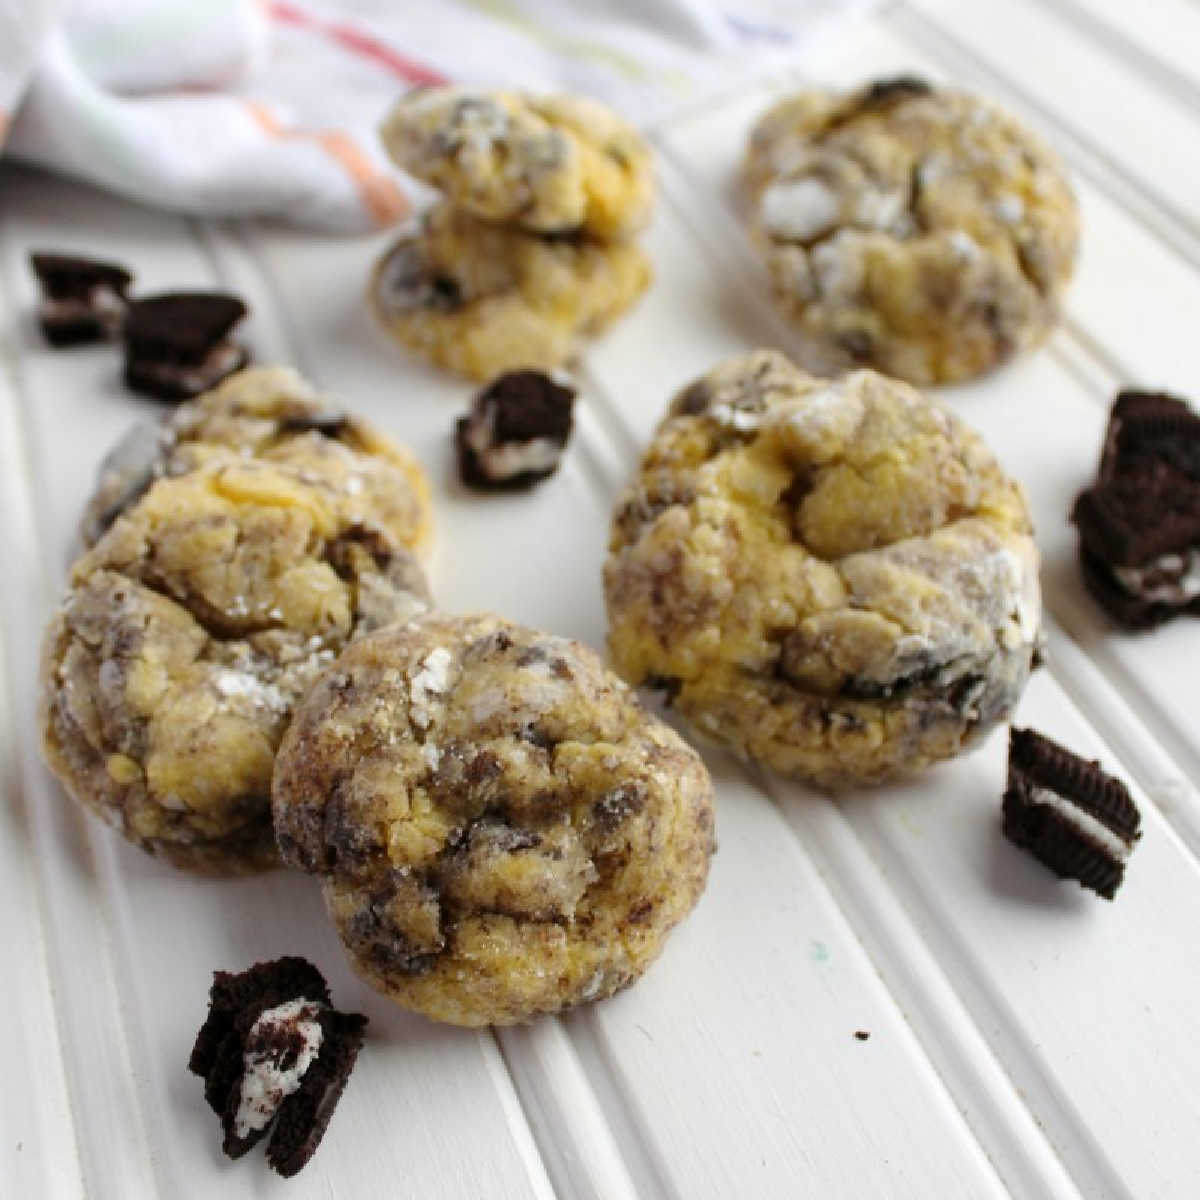 Soft cookies with bits of Oreos baked inside, coated in powdered sugar with more Oreo bits nearby.